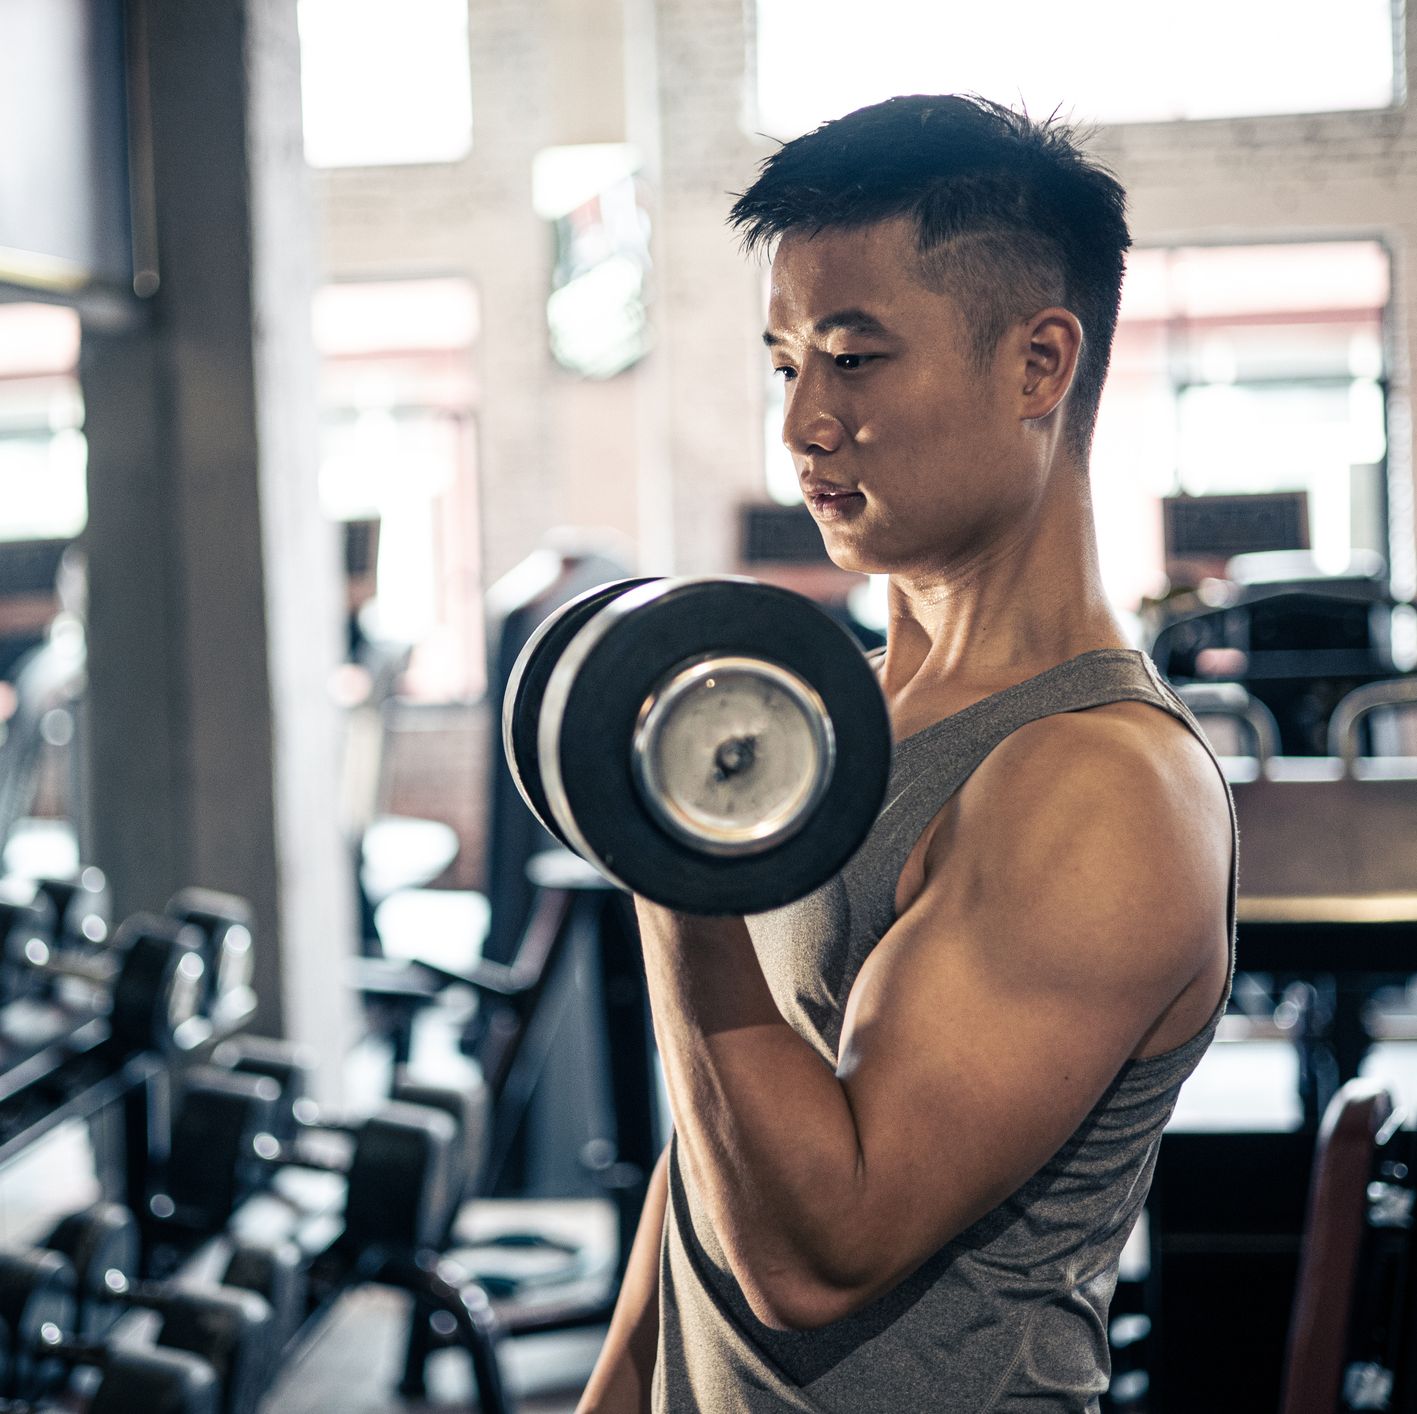 Why Training With High Reps for Muscular Endurance Won't Wreck Your Gains